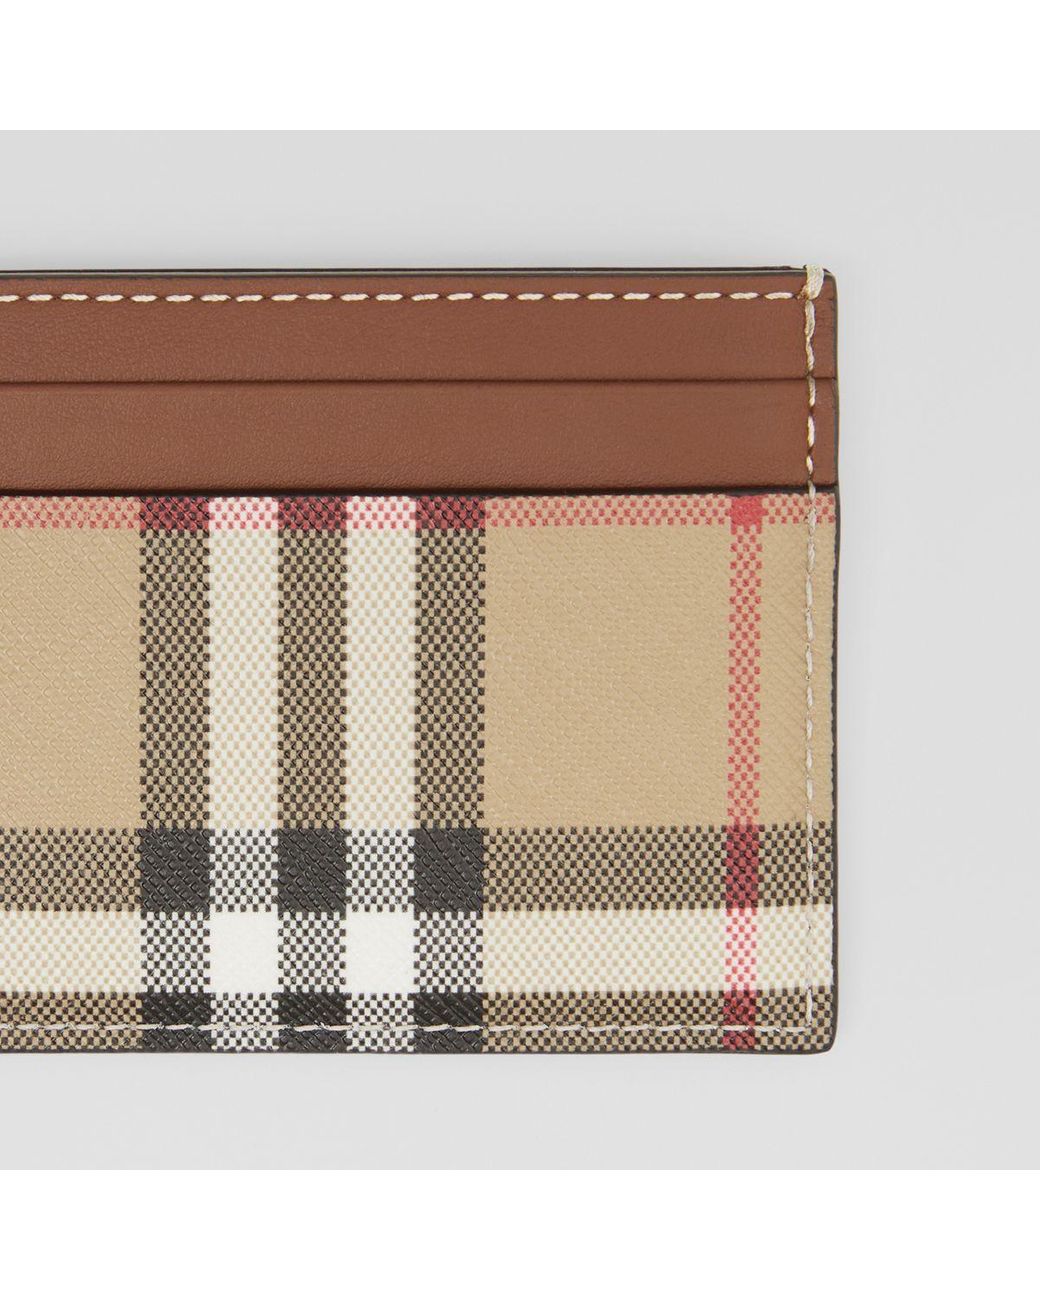 Burberry Vintage Check And Leather Card Case in Brown | Lyst